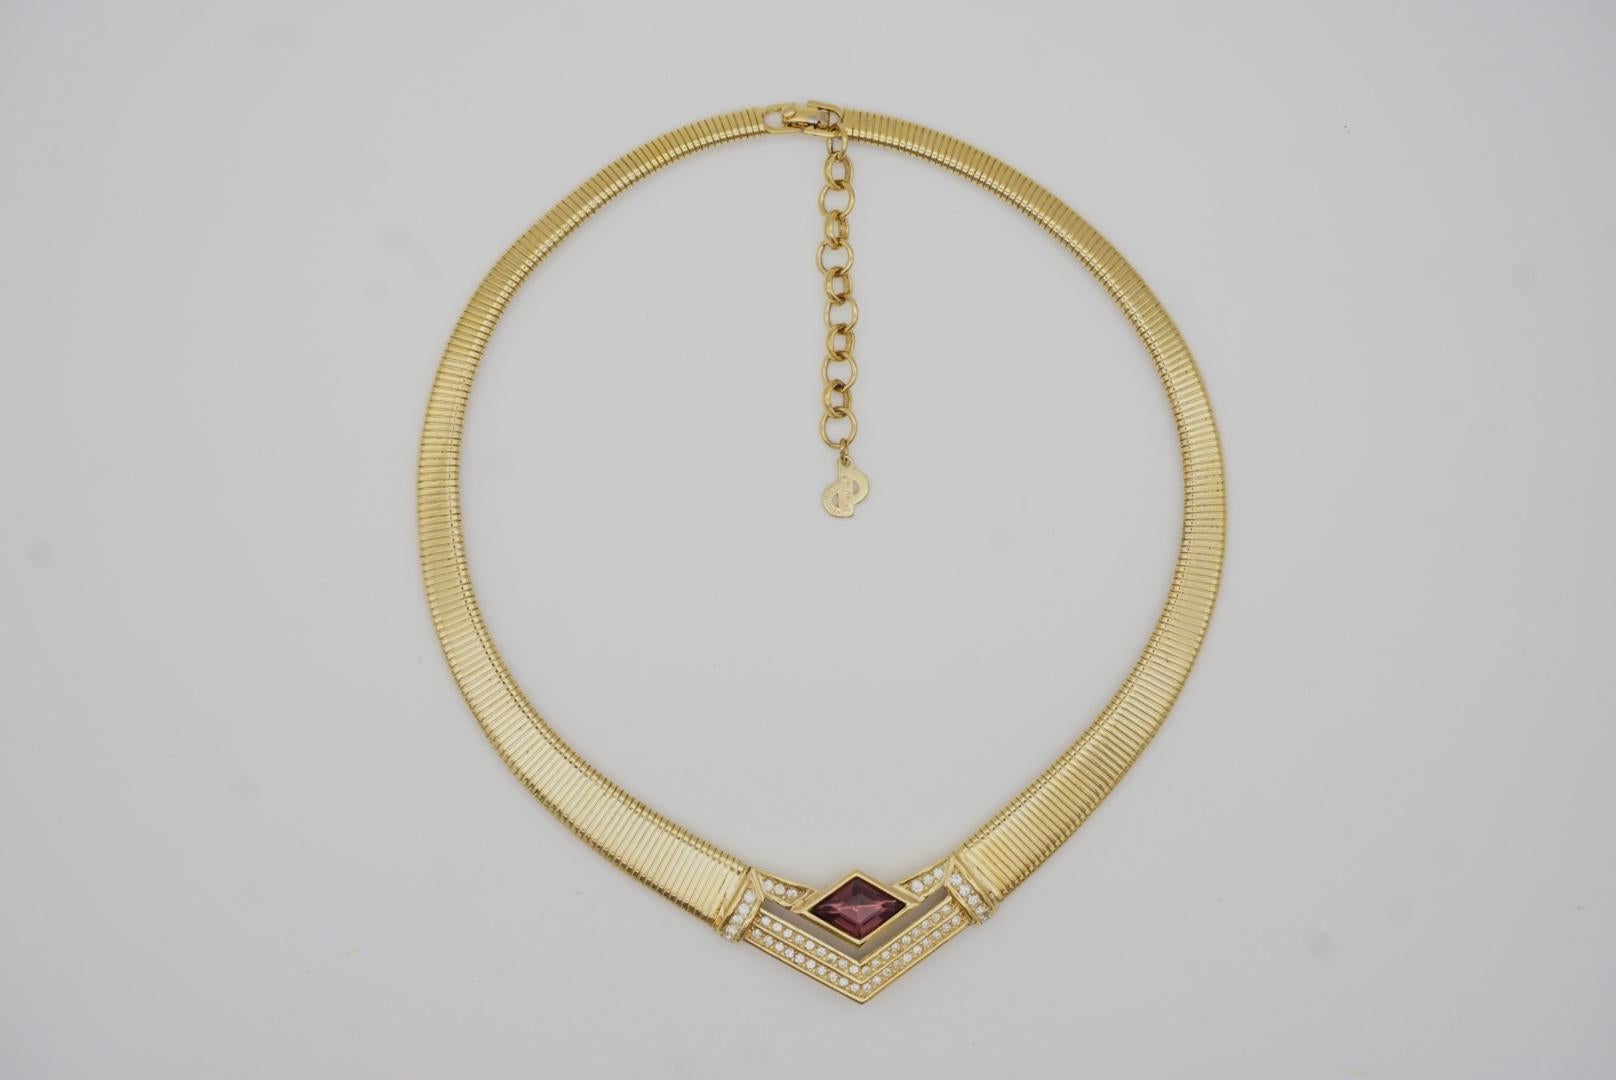 Christian Dior Vintage 1980s Ribbed Amethyst Crystals Triangle Choker Necklace For Sale 1